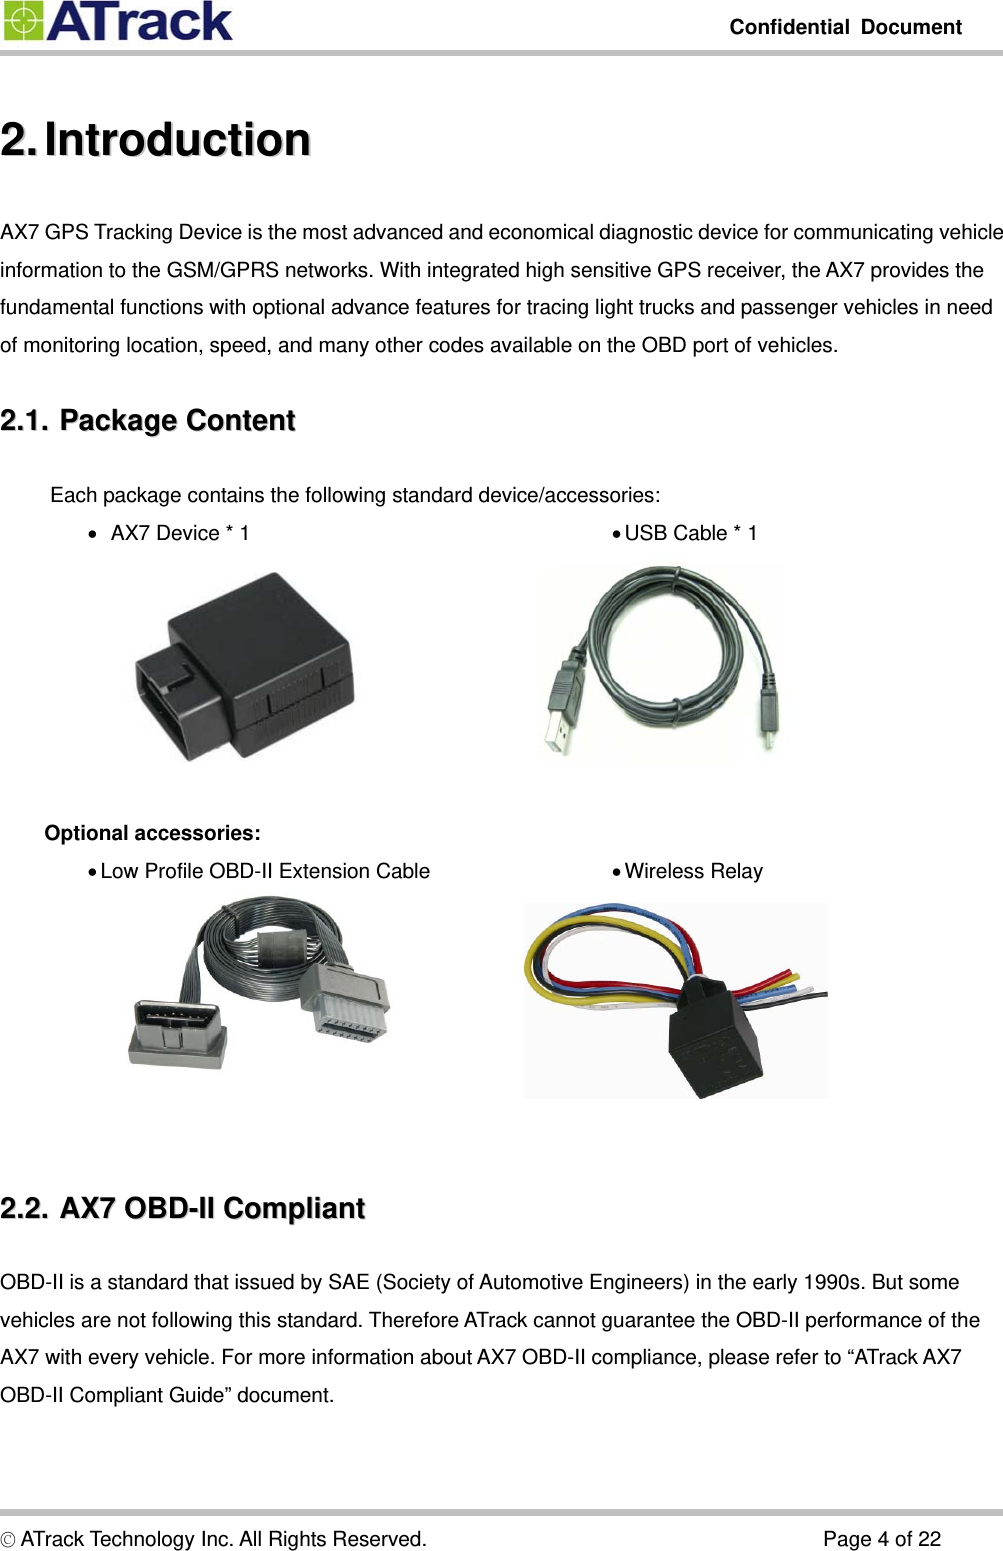         Confidential Document  © ATrack Technology Inc. All Rights Reserved.                                      Page 4 of 22 22..  IInnttrroodduuccttiioonn  AX7 GPS Tracking Device is the most advanced and economical diagnostic device for communicating vehicle information to the GSM/GPRS networks. With integrated high sensitive GPS receiver, the AX7 provides the fundamental functions with optional advance features for tracing light trucks and passenger vehicles in need of monitoring location, speed, and many other codes available on the OBD port of vehicles. 22..11..  PPaacckkaaggee  CCoonntteenntt  Each package contains the following standard device/accessories:    AX7 Device * 1   USB Cable * 1   Optional accessories:  Low Profile OBD-II Extension Cable       Wireless Relay   22..22..  AAXX77  OOBBDD--IIII  CCoommpplliiaanntt  OBD-II is a standard that issued by SAE (Society of Automotive Engineers) in the early 1990s. But some vehicles are not following this standard. Therefore ATrack cannot guarantee the OBD-II performance of the AX7 with every vehicle. For more information about AX7 OBD-II compliance, please refer to “ATrack AX7 OBD-II Compliant Guide” document.  